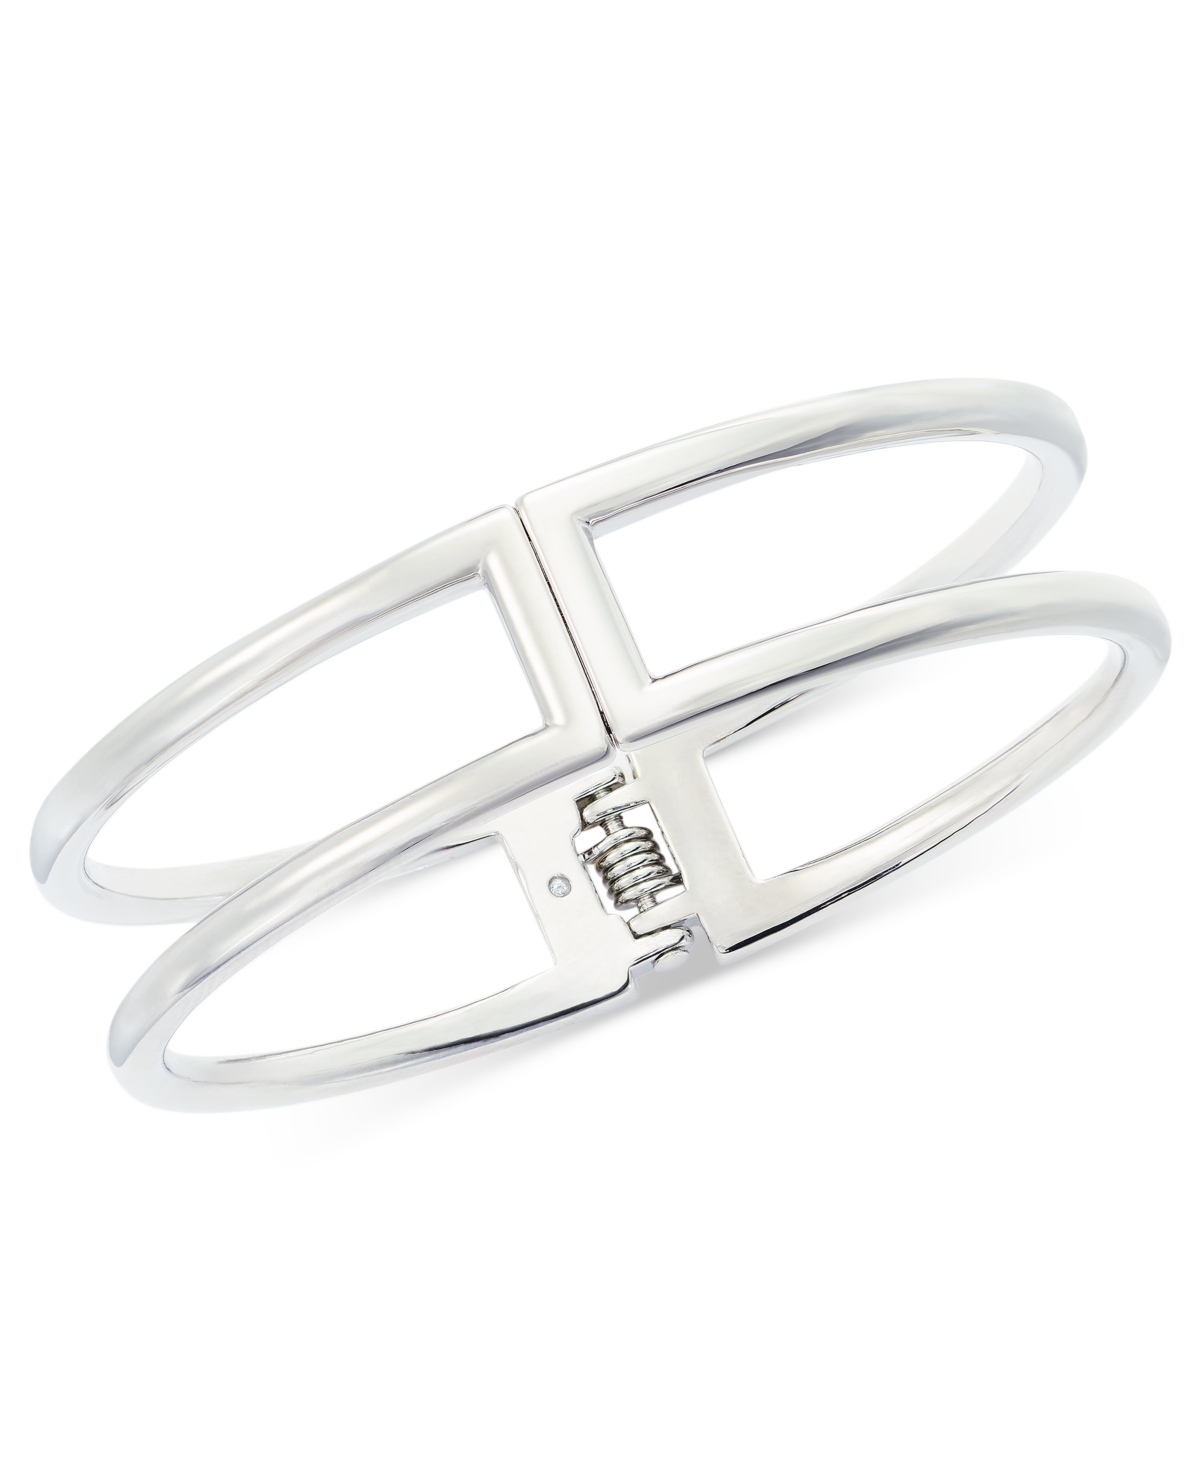 Silver-Tone Double-Row Bangle Bracelet, Created for Macy's - Silver